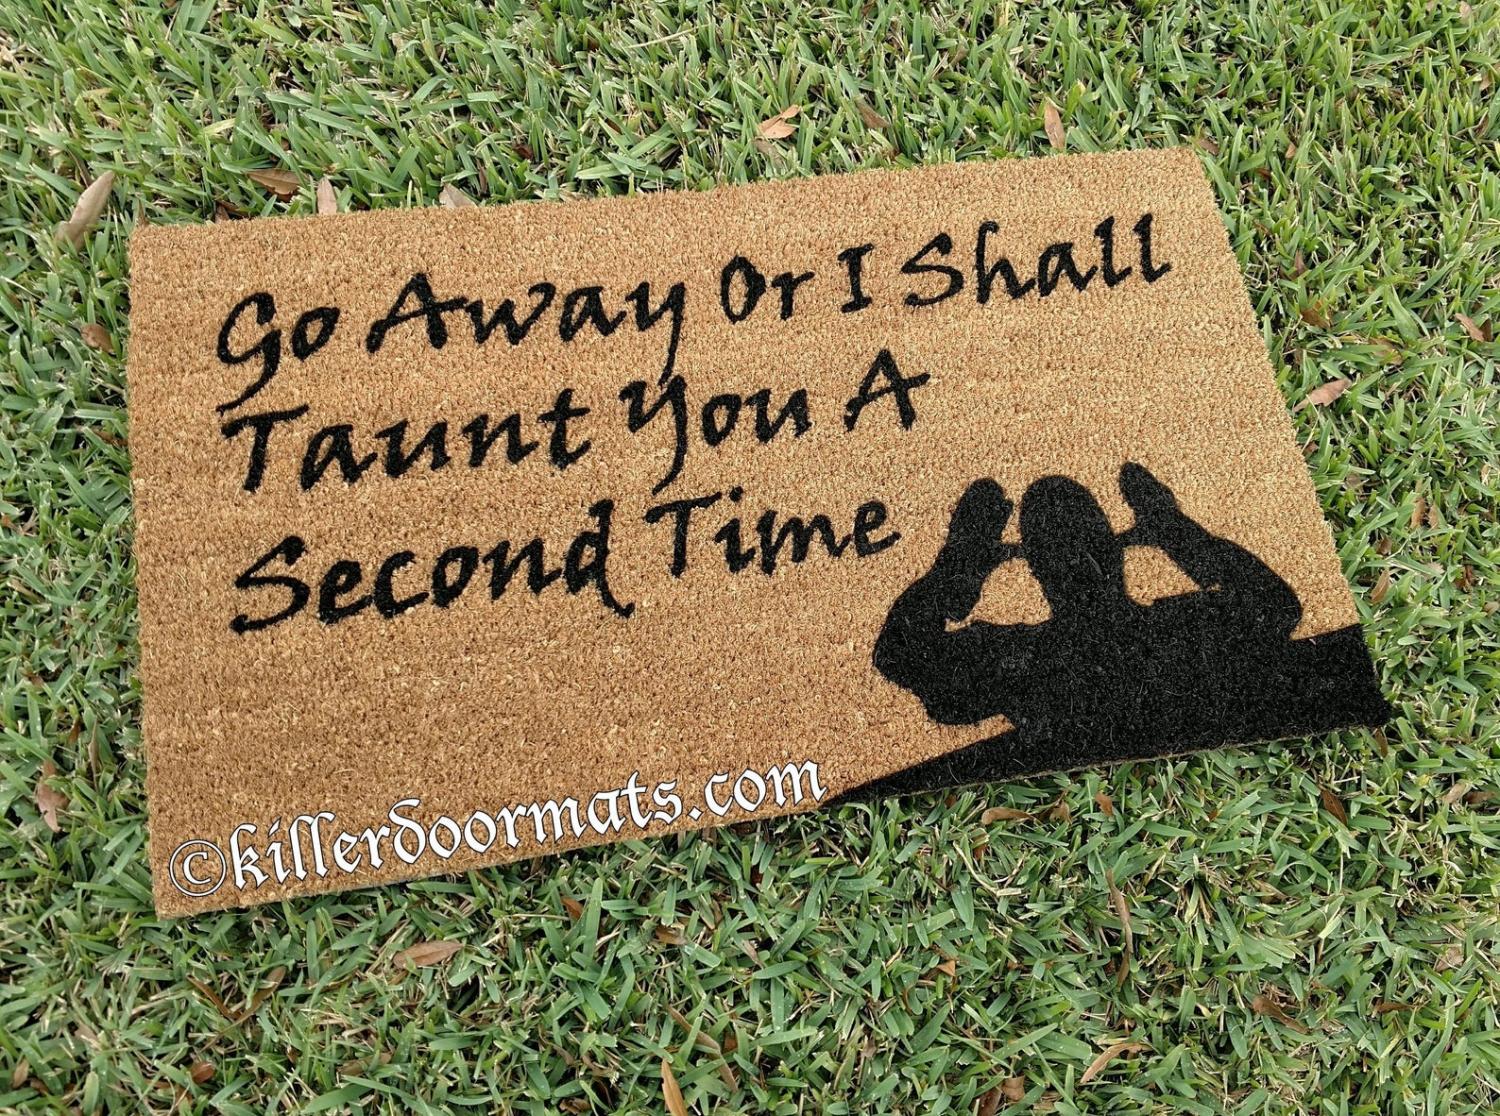 Monty Python Doormat - Go away or i shall taunt you a second time funny doormat